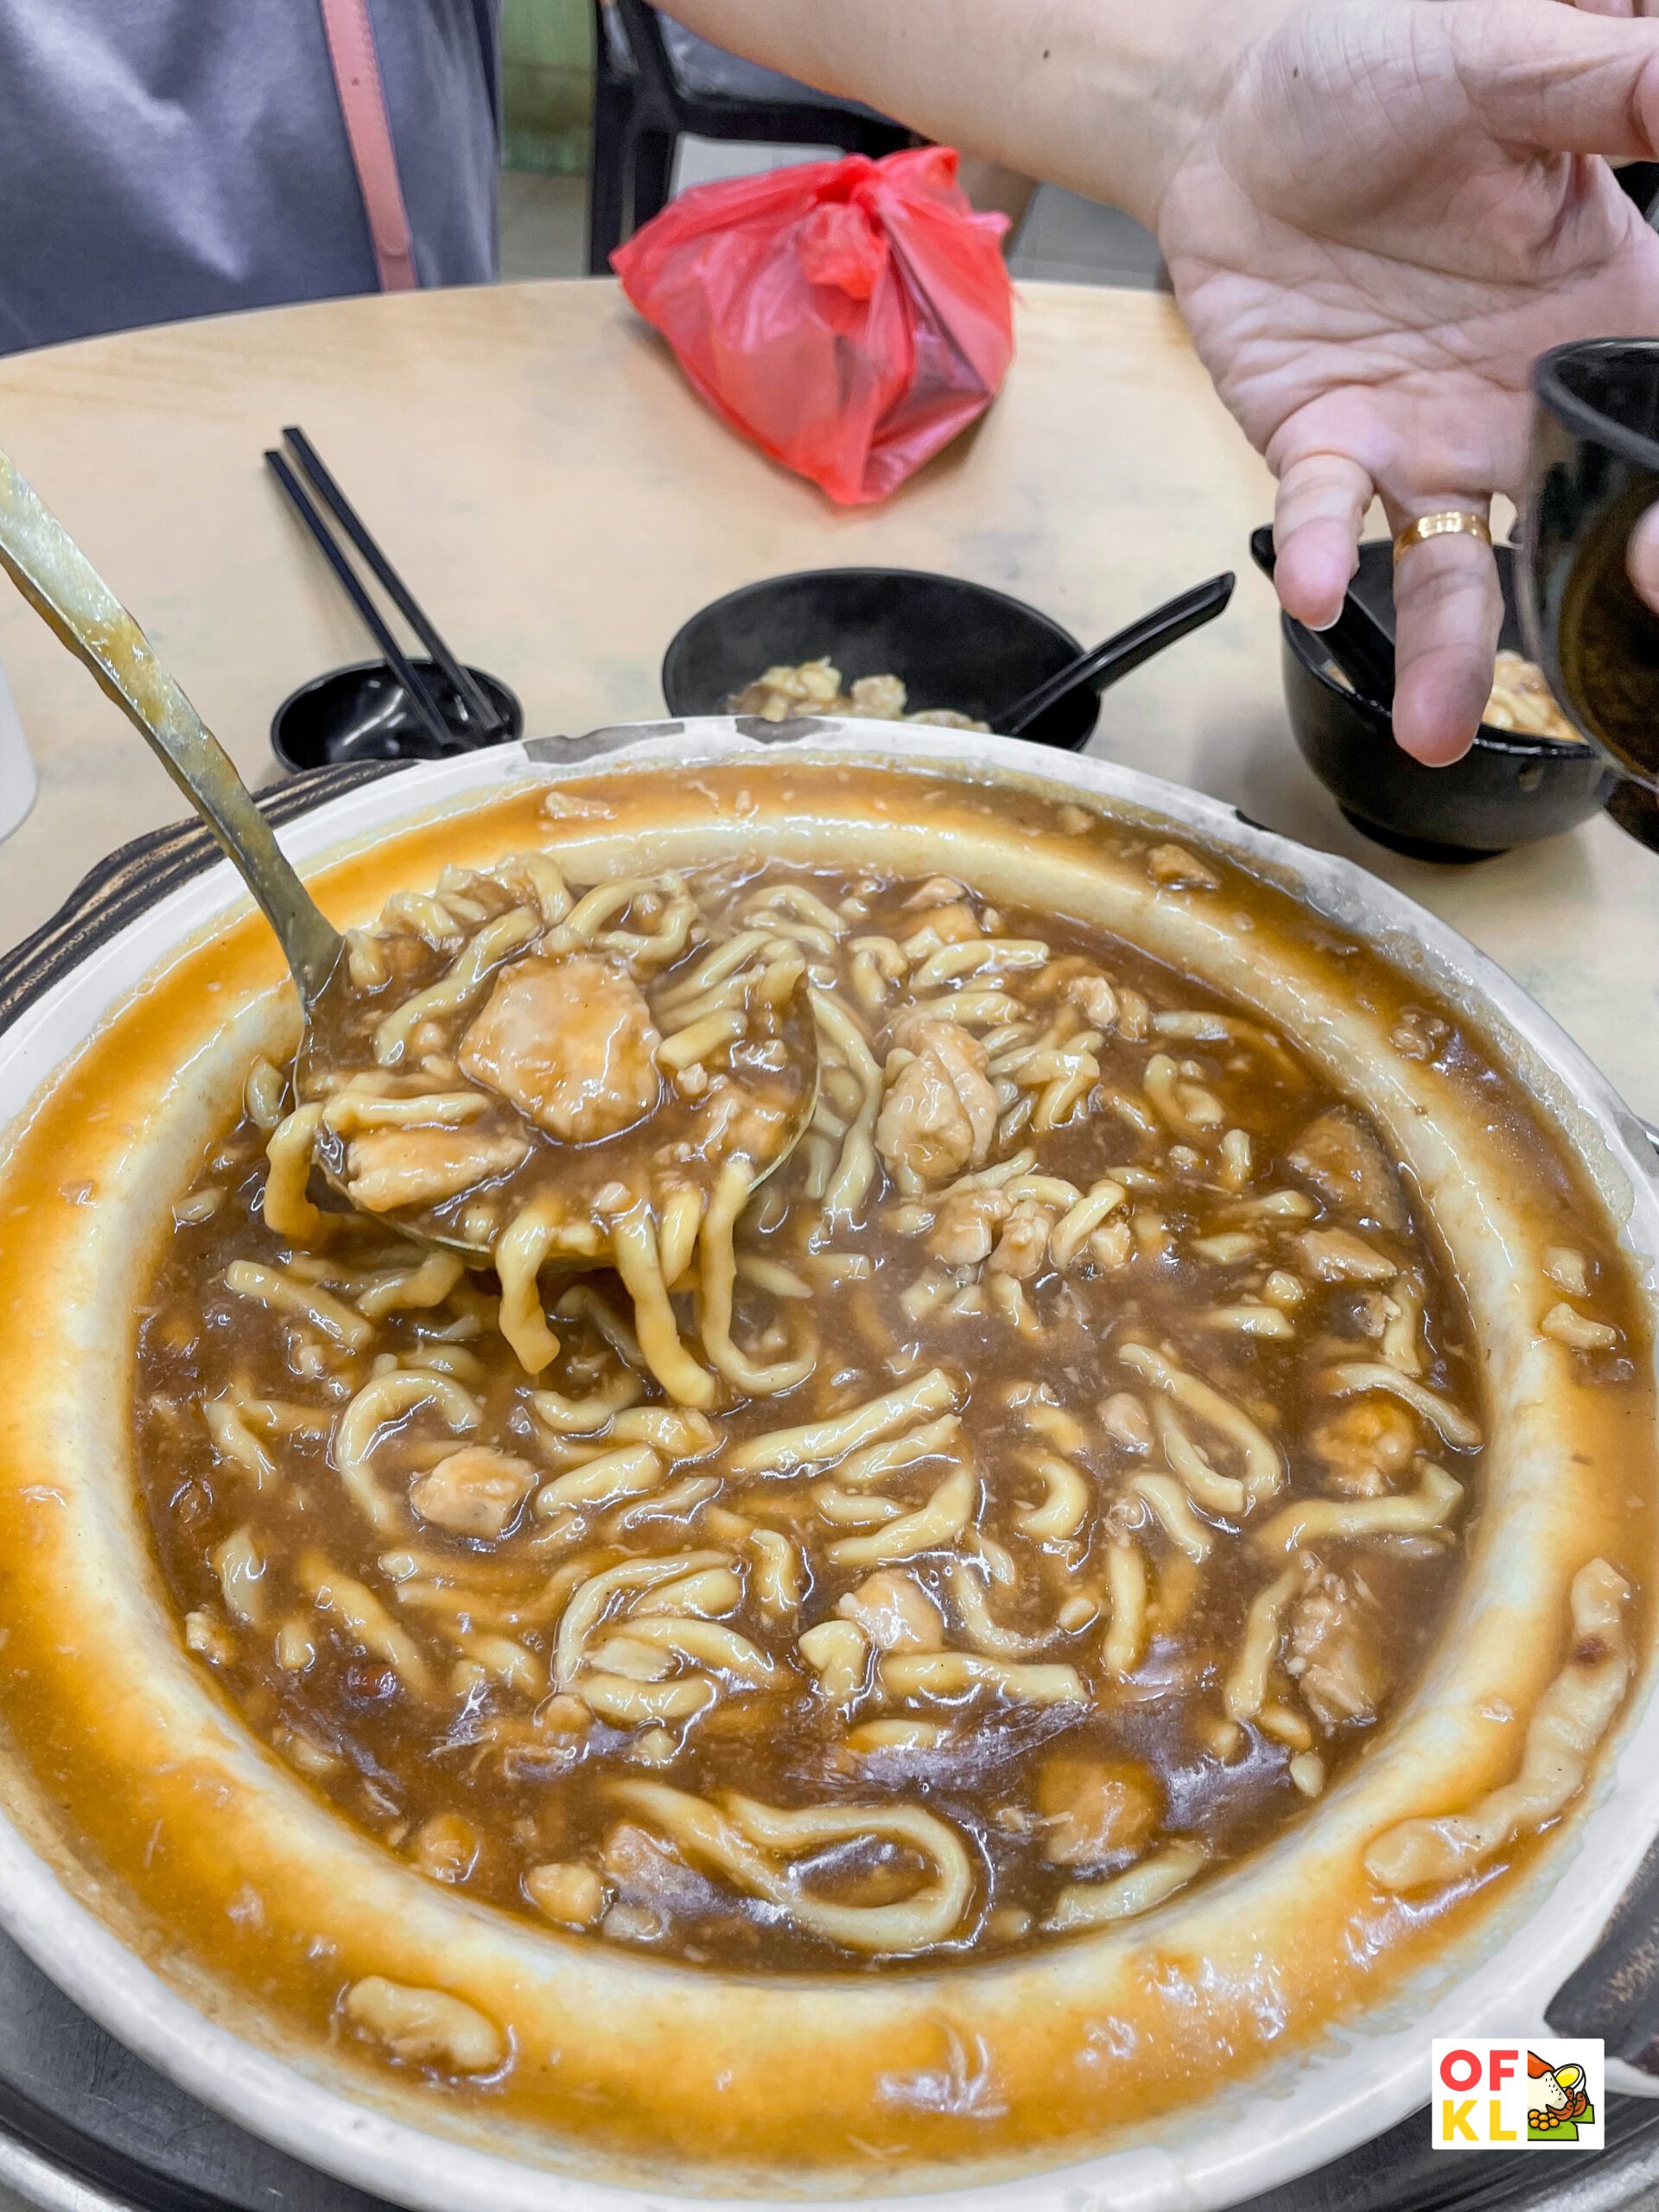 Ulu Yam Loh Mee: Their Loh Mee wasn't as good as the Yam Claypot Noodles | OnlyFoodKL